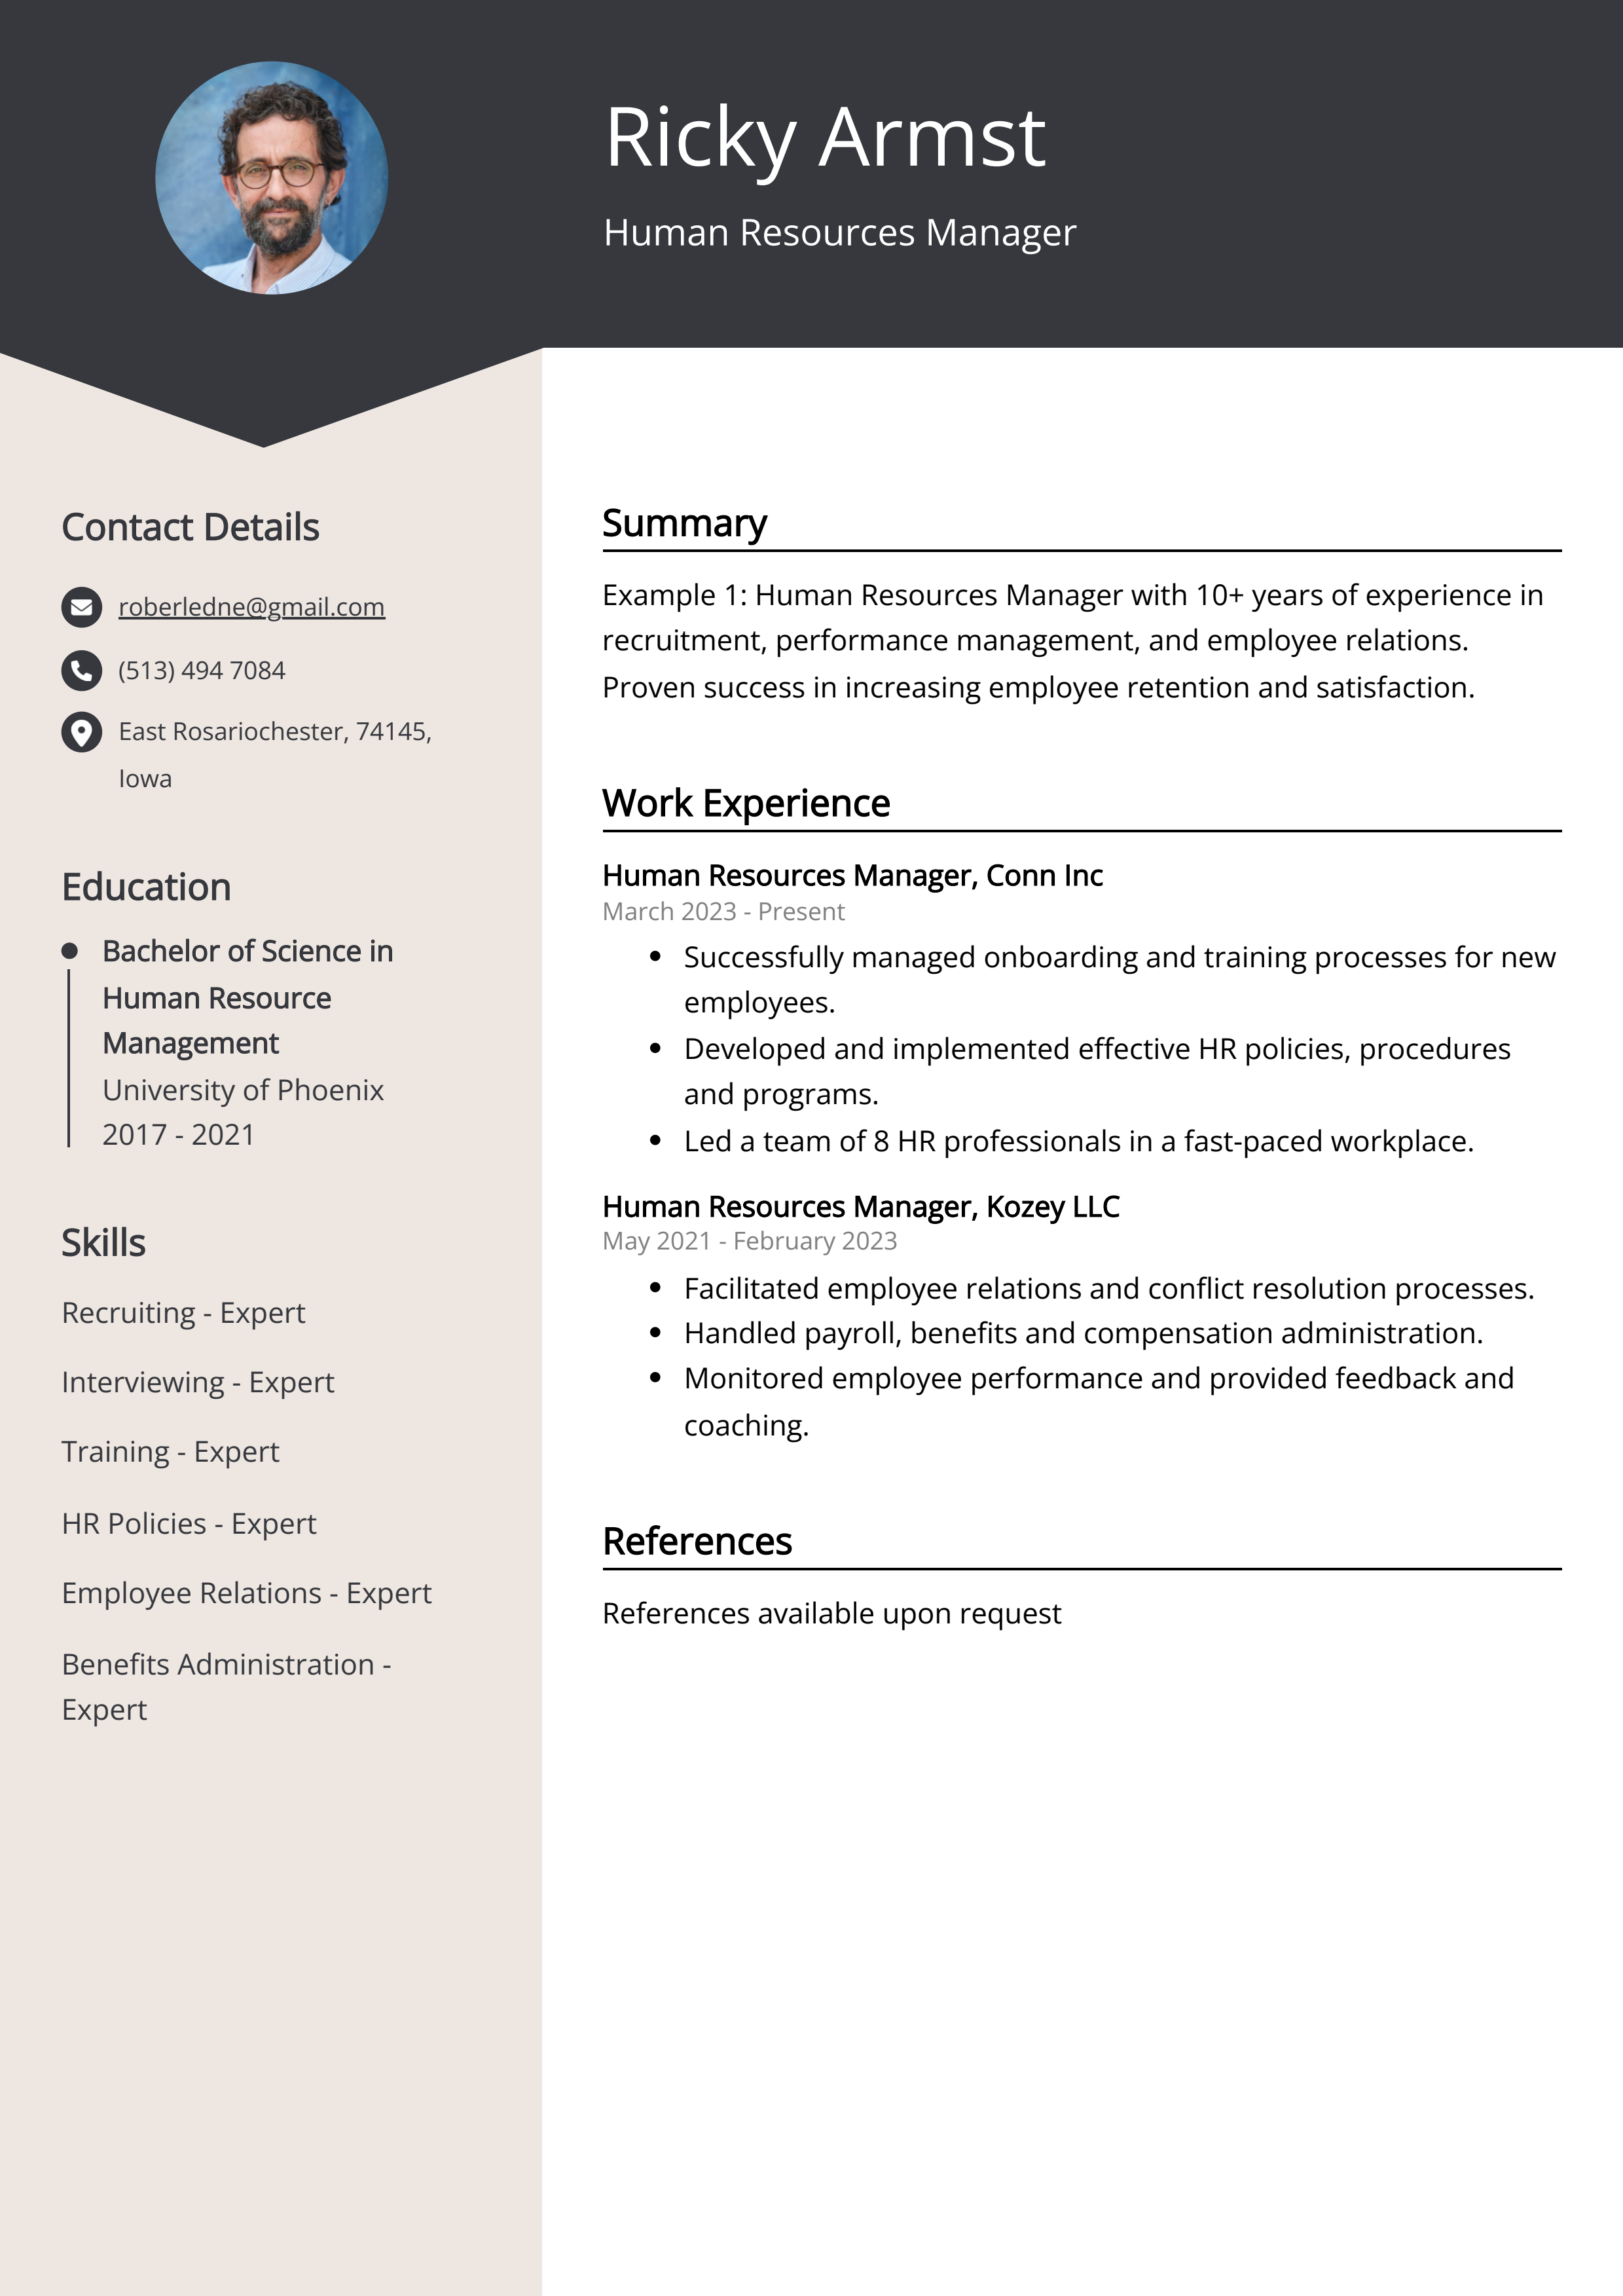 Human Resources Manager CV Example